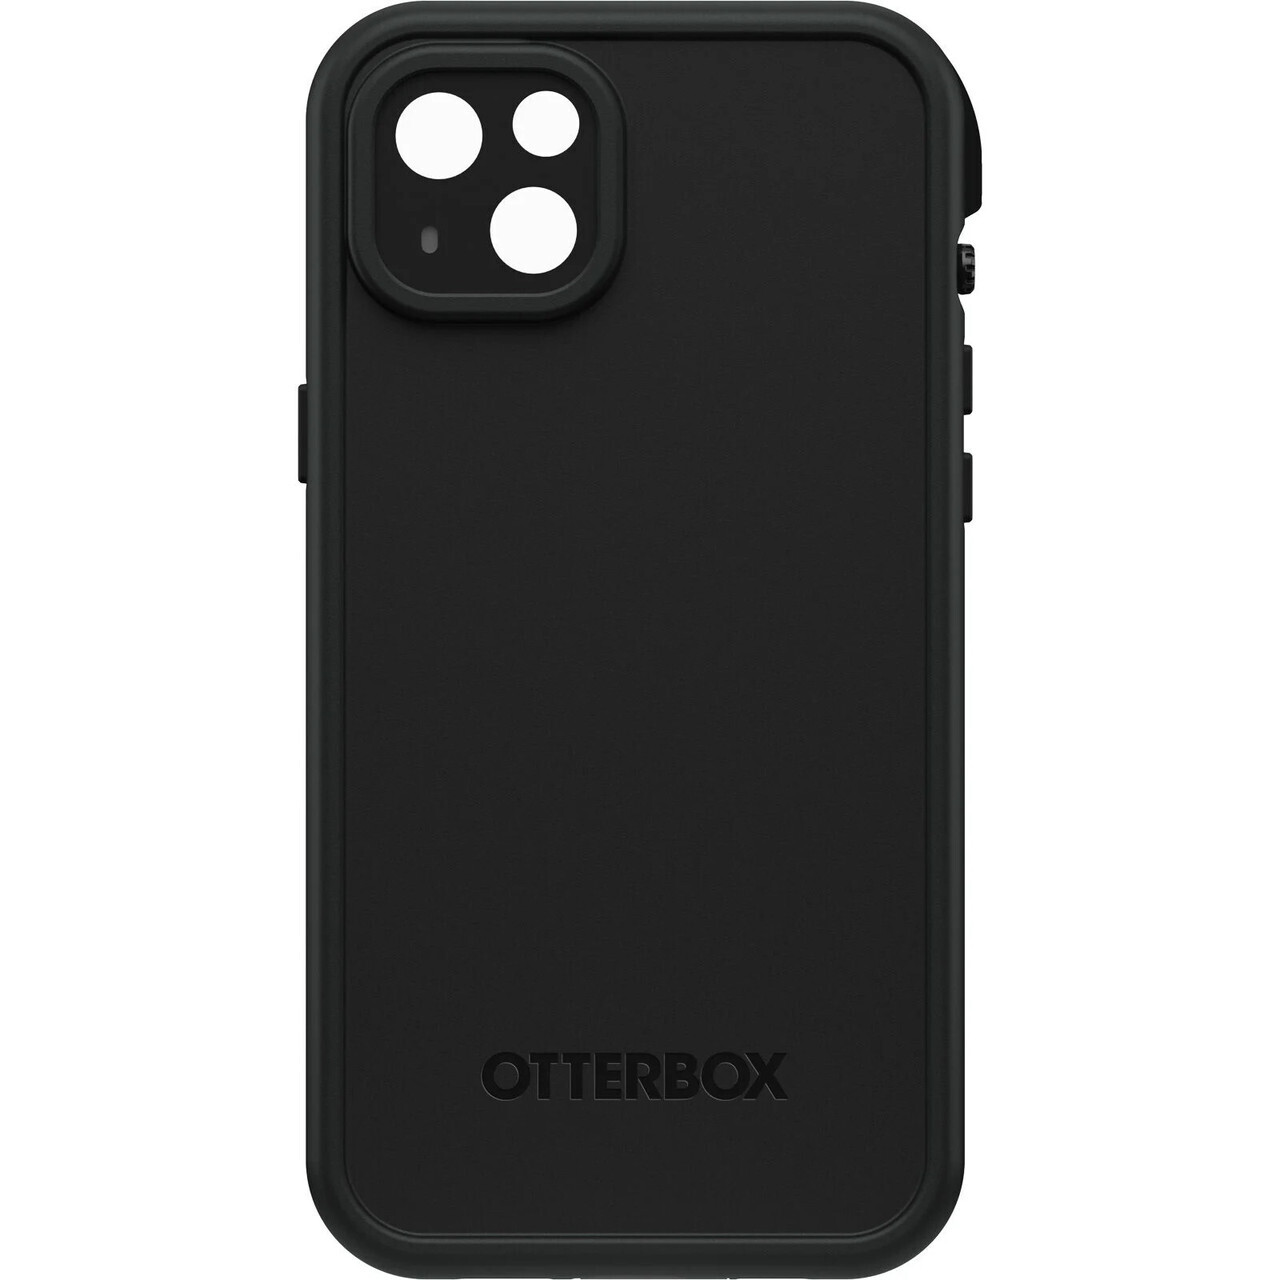 OtterBox FRE Magsafe Apple iPhone 14 Plus Case Black - (77-90169), DROP+ 5X Military Standard, 2M WaterProof,Built-In Screen Protector,360 Protection